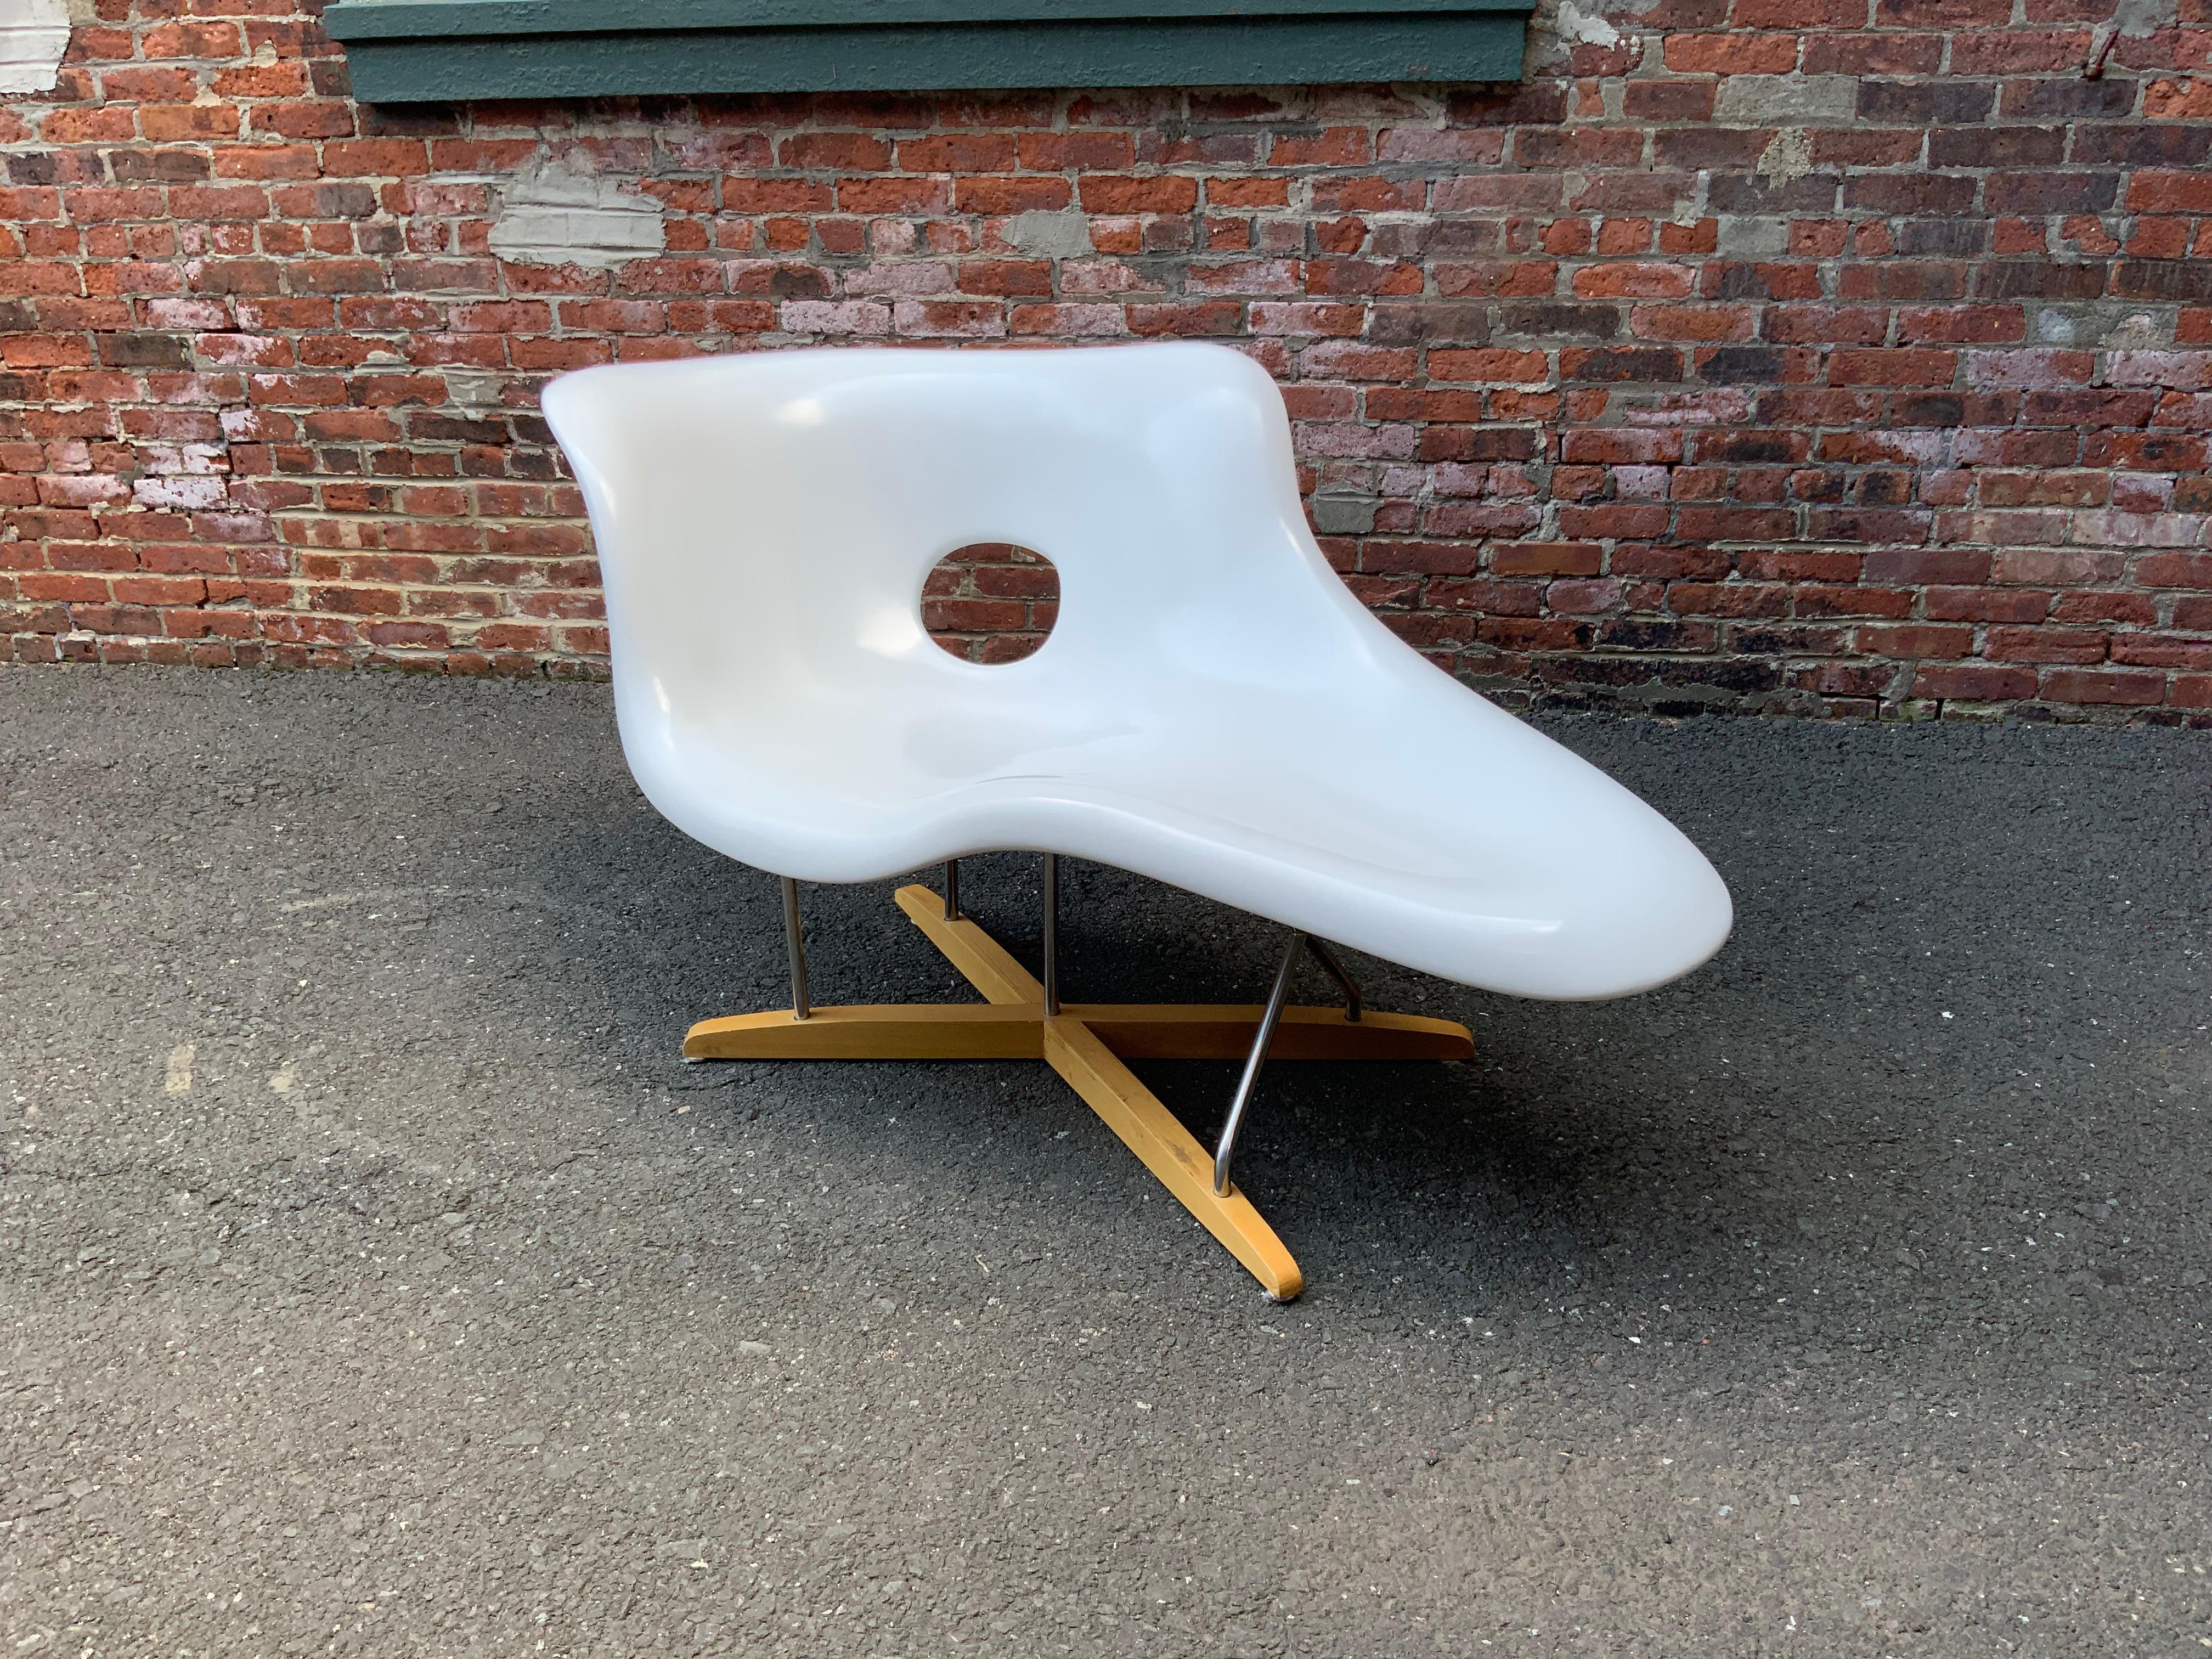 La Chaise was the innovative design of Ray and Charles Eames. The design was their entry in MOMA's 1948 International Competition for Low Cost Design. The cloud-like molded fiberglass form pays homage to Gaston Lachaise's scultpure.

This chair